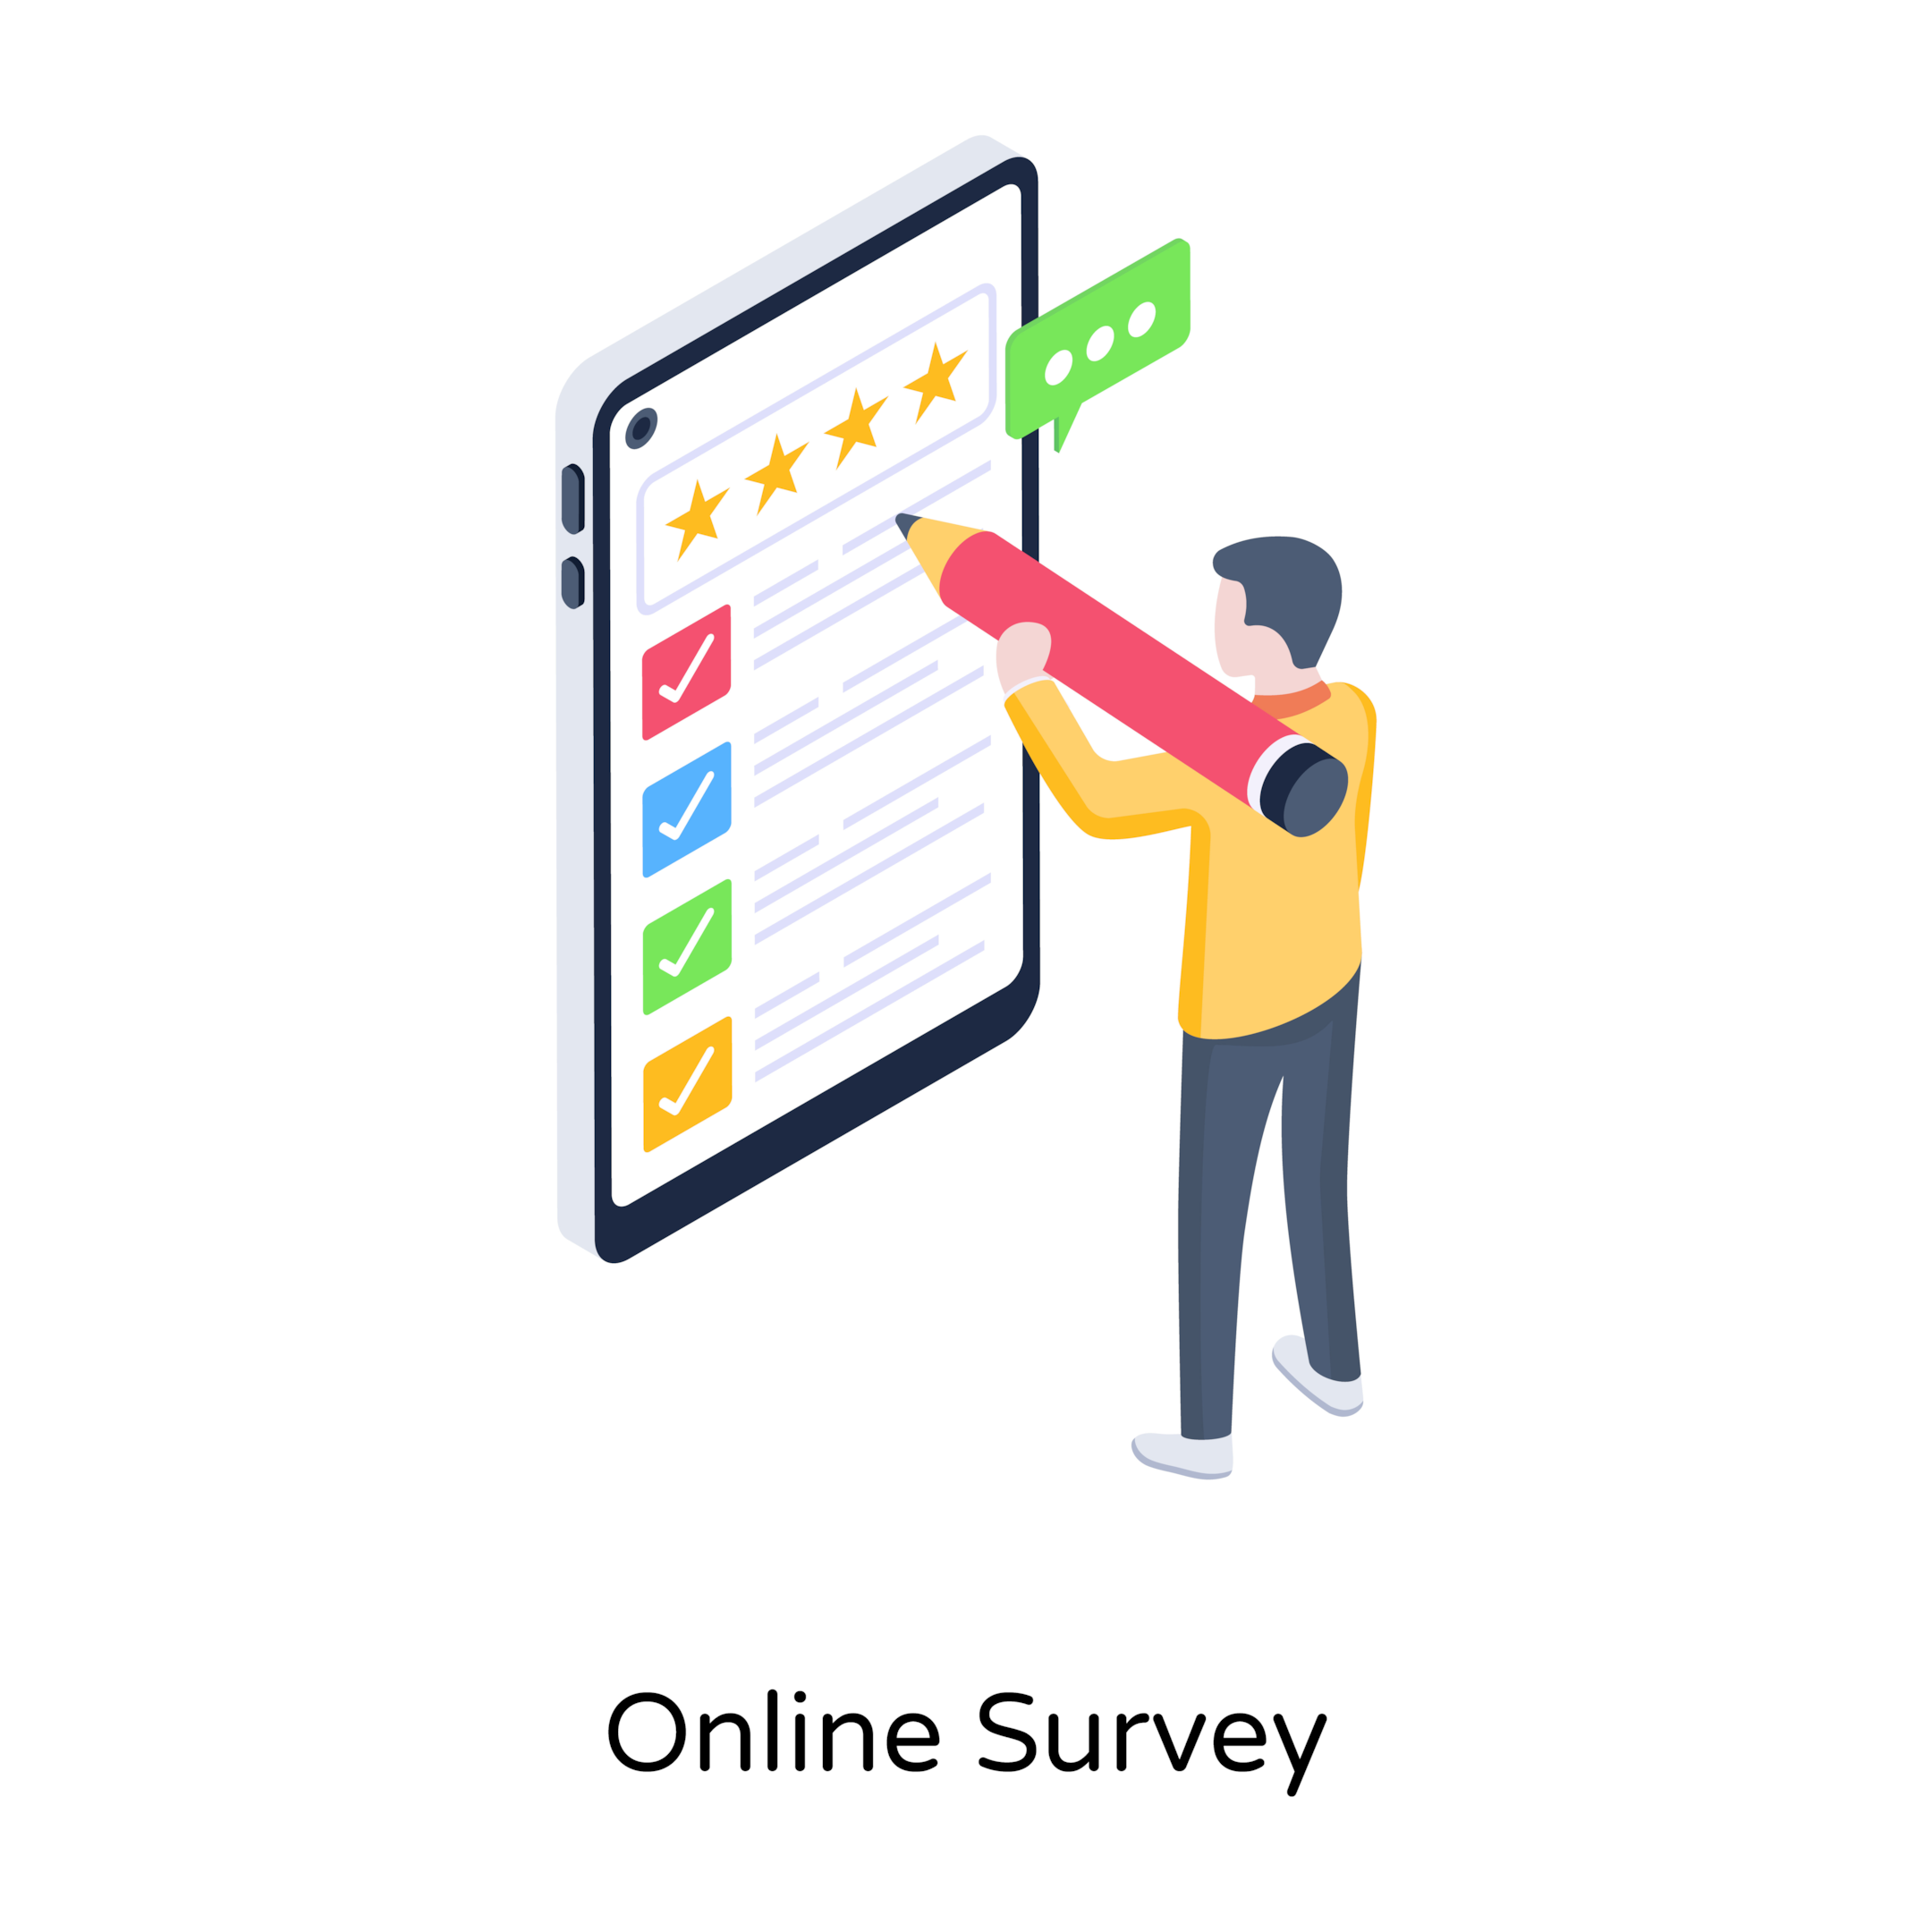 sms survey software can help companies improve their net promoter score